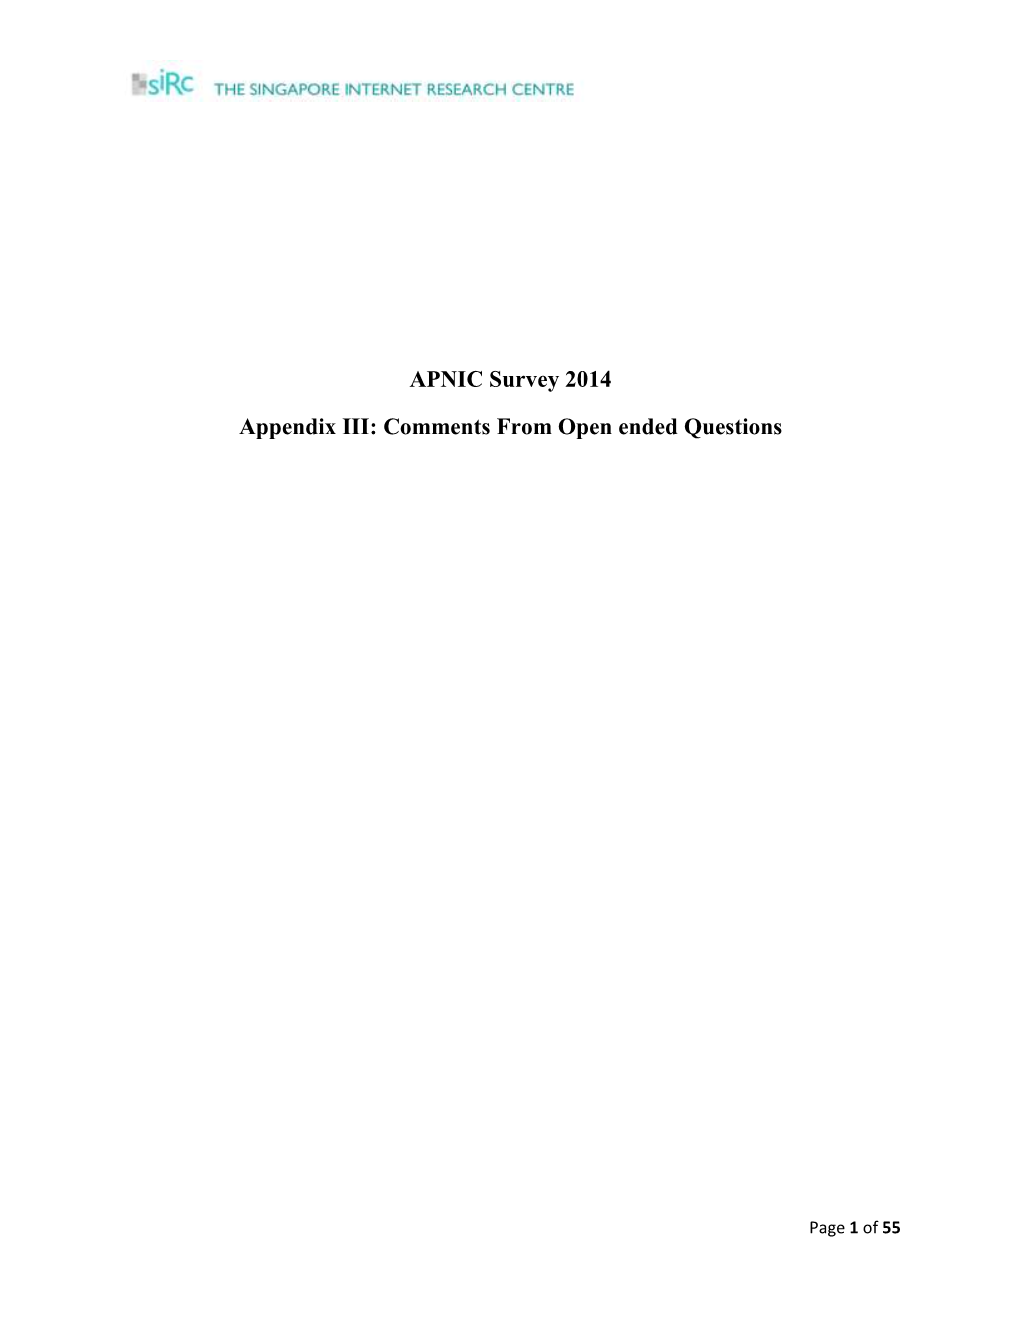 APNIC Survey 2014 Appendix III: Comments from Open Ended